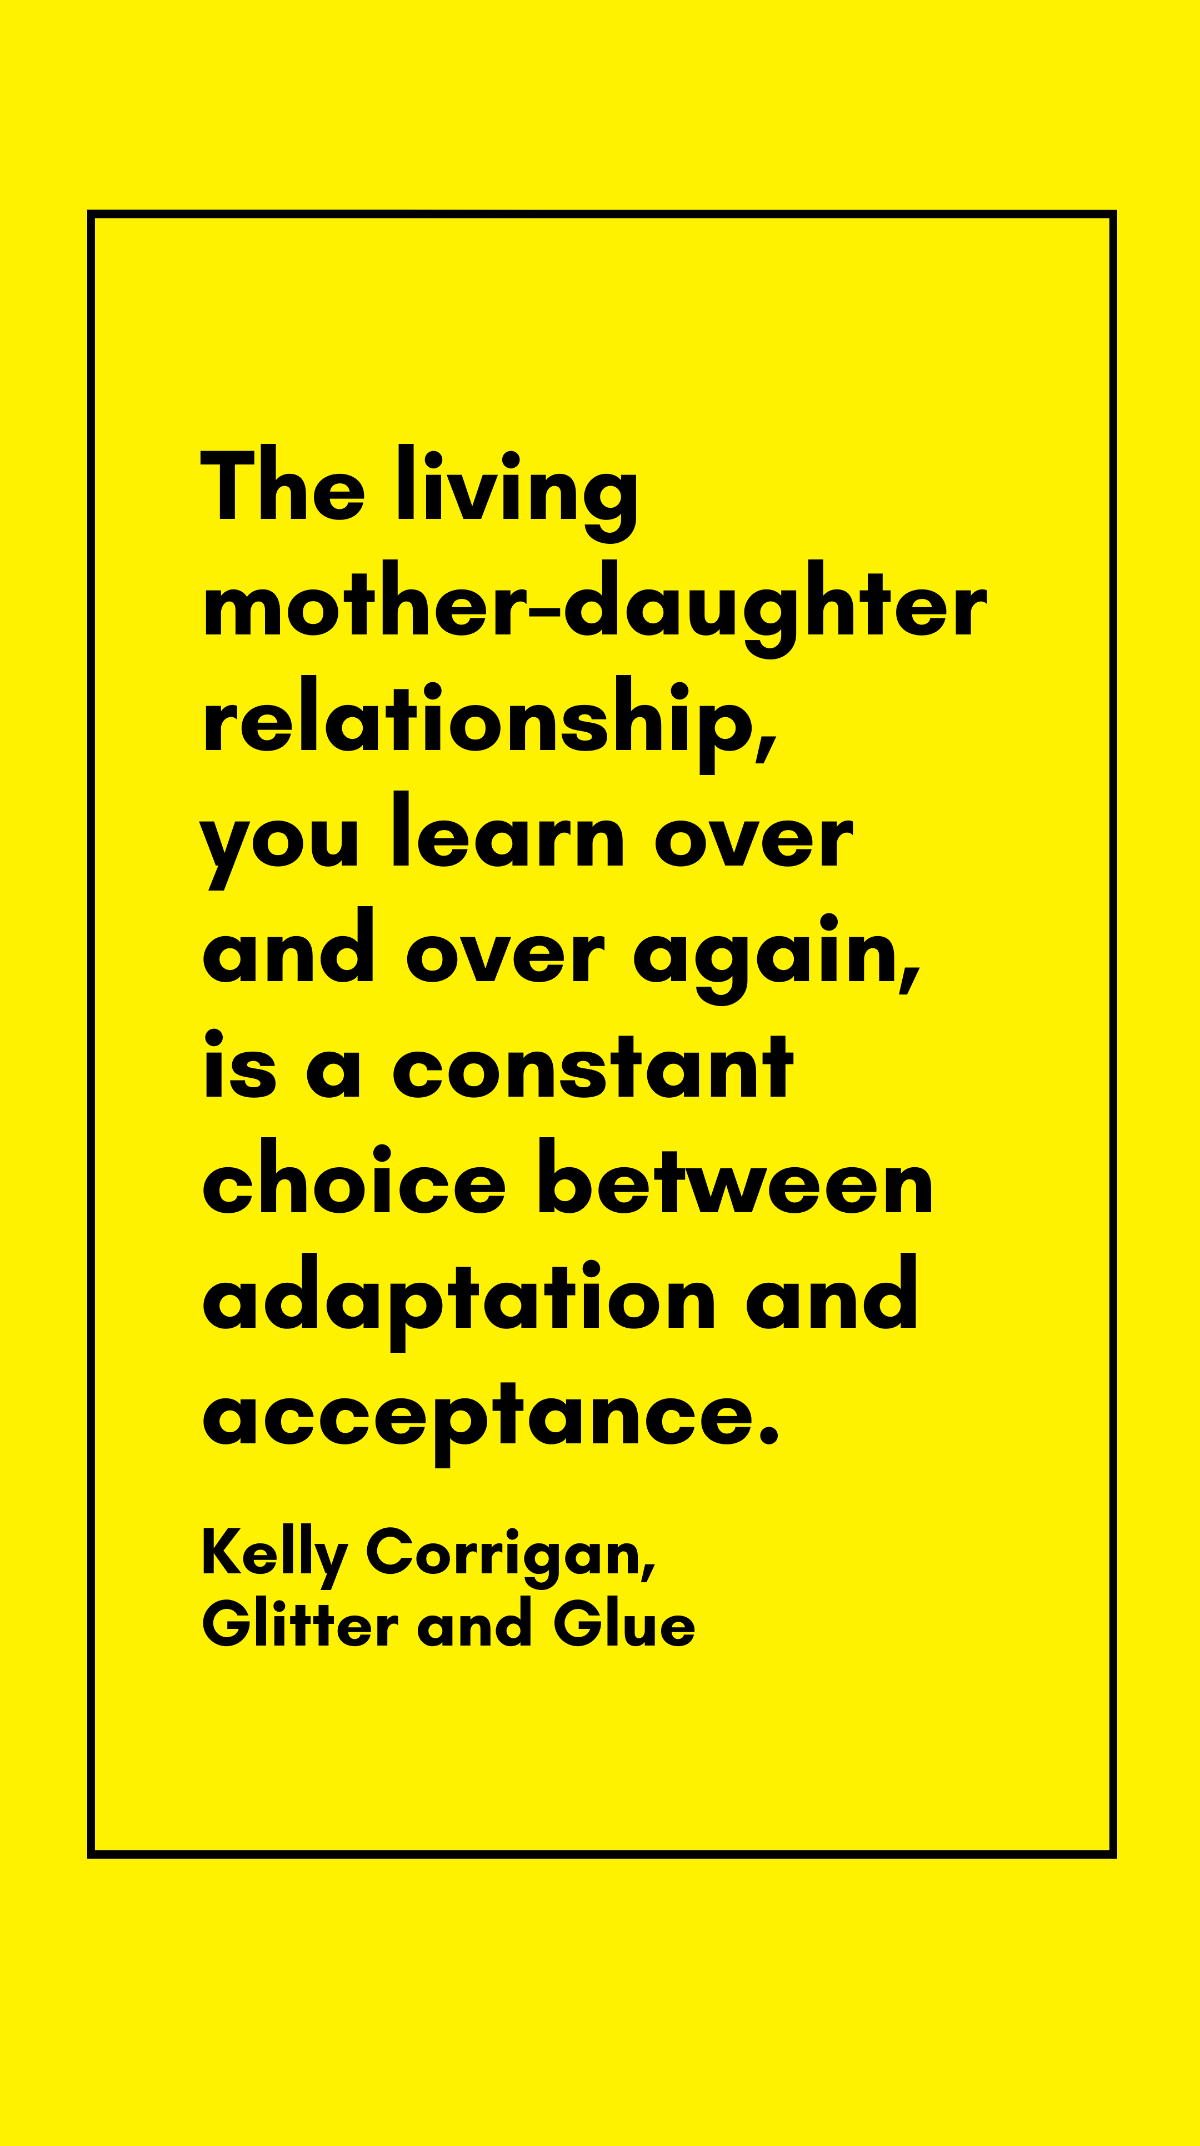 Free Kelly Corrigan, Glitter and Glue - The living mother-daughter relationship, you learn over and over again, is a constant choice between adaptation and acceptance. Template